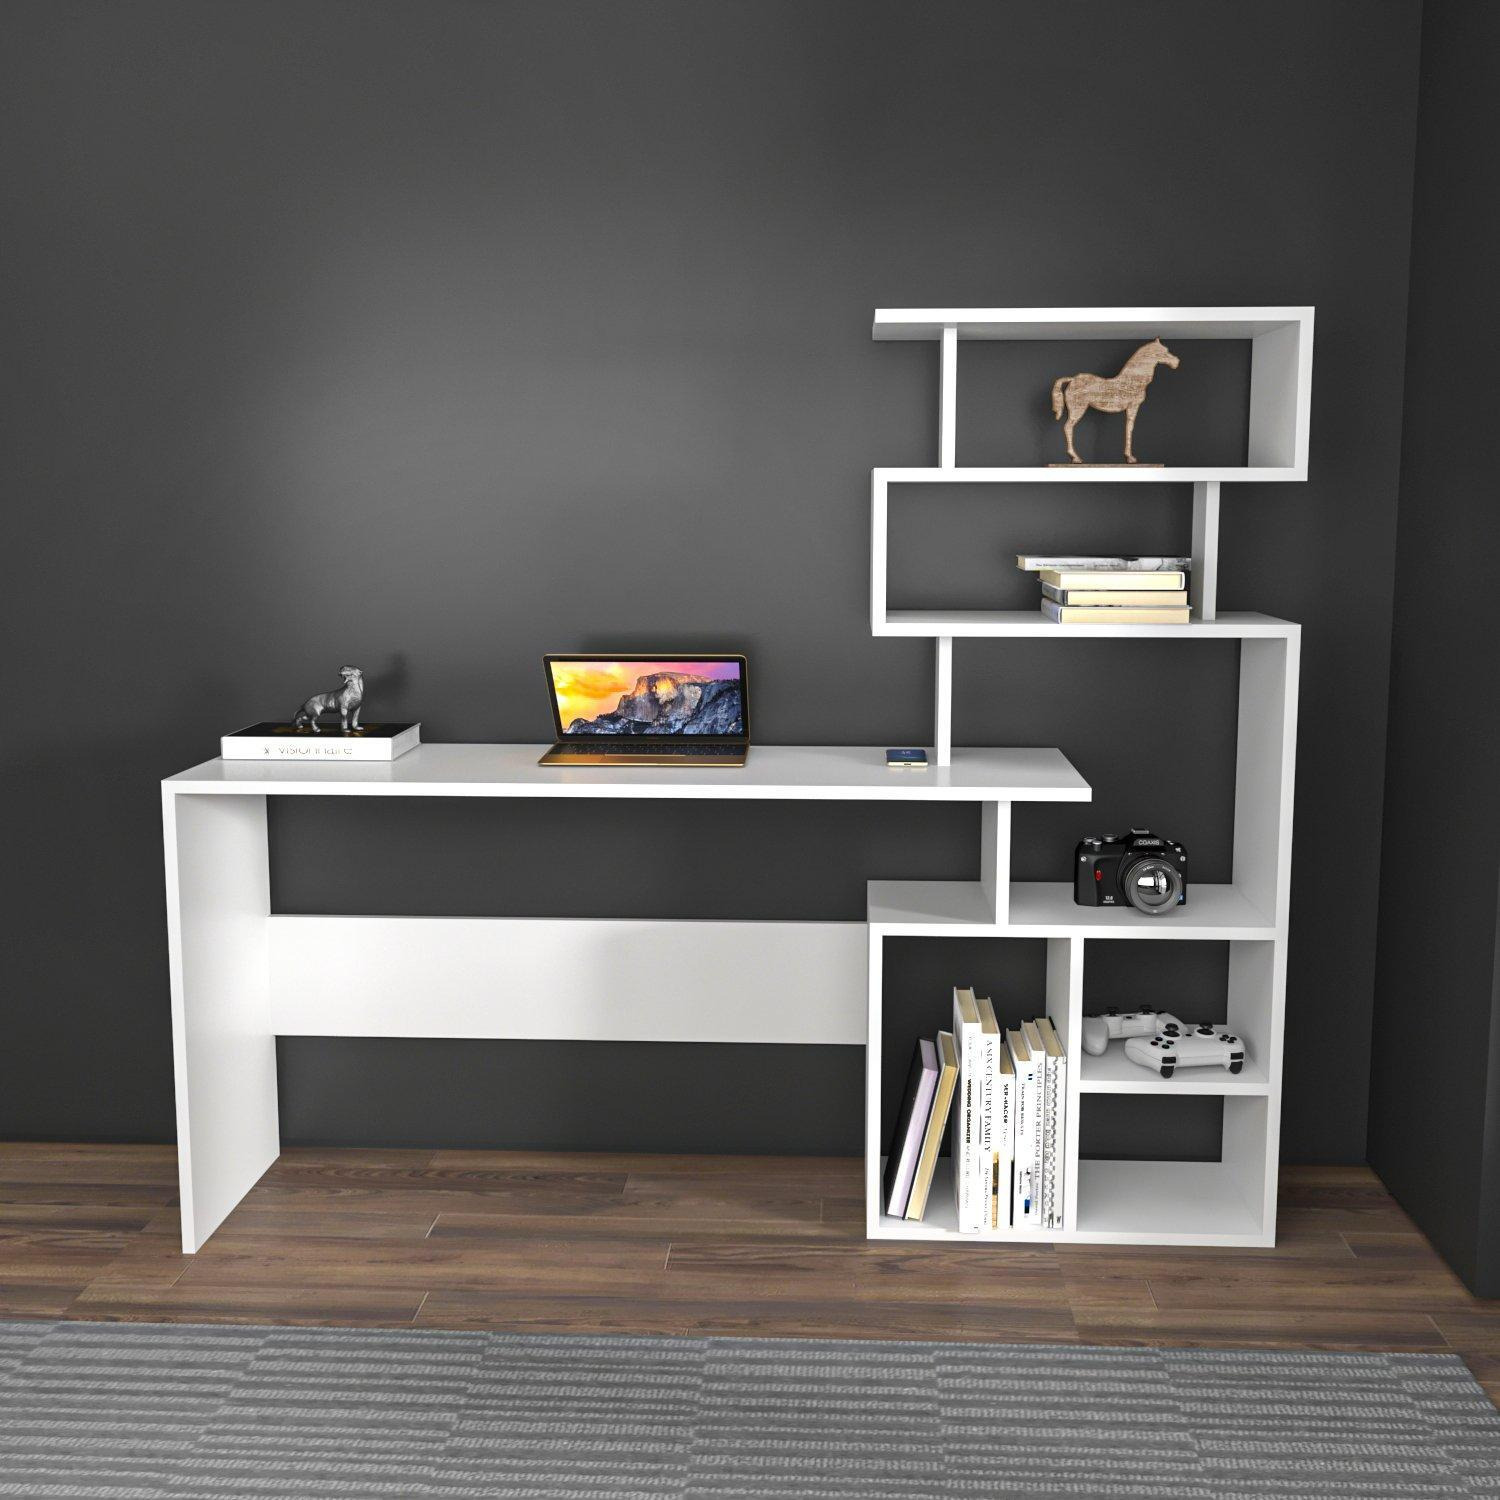 Next Computer and Study Desk Workstation with Shelving Unit - image 1